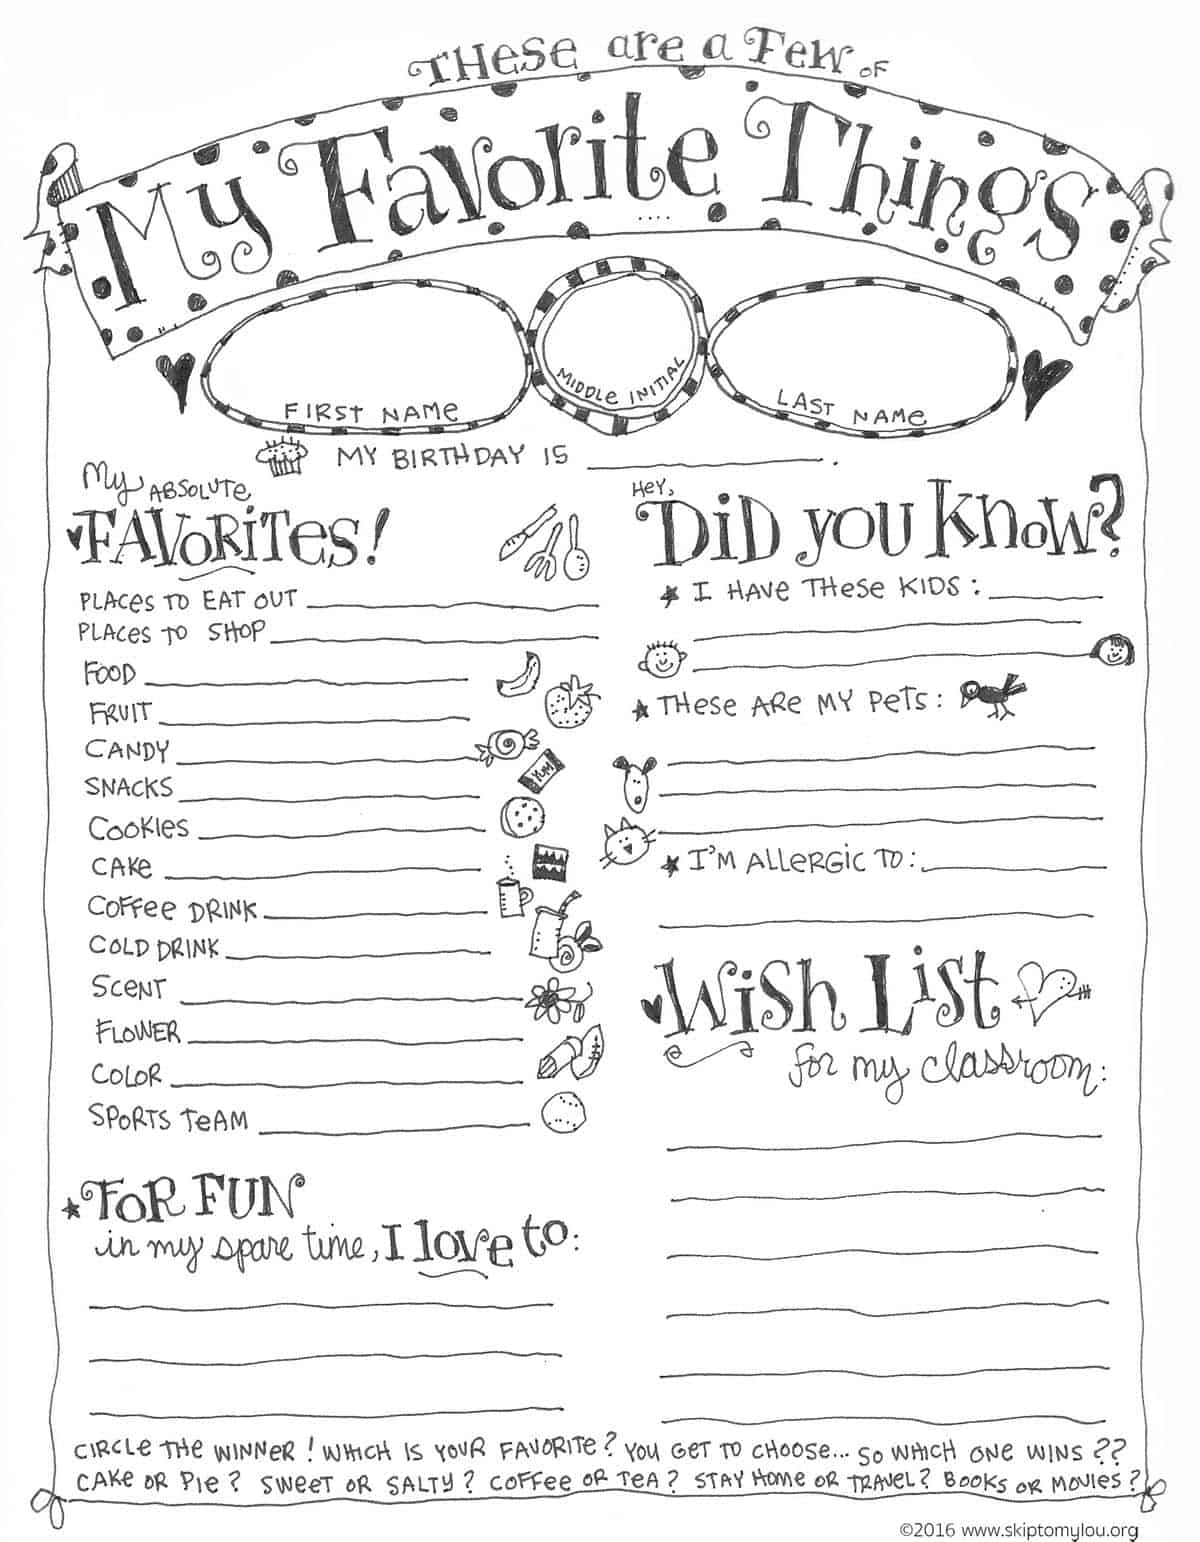 teacher-favorite-things-questionnaire-printable-skip-to-my-lou